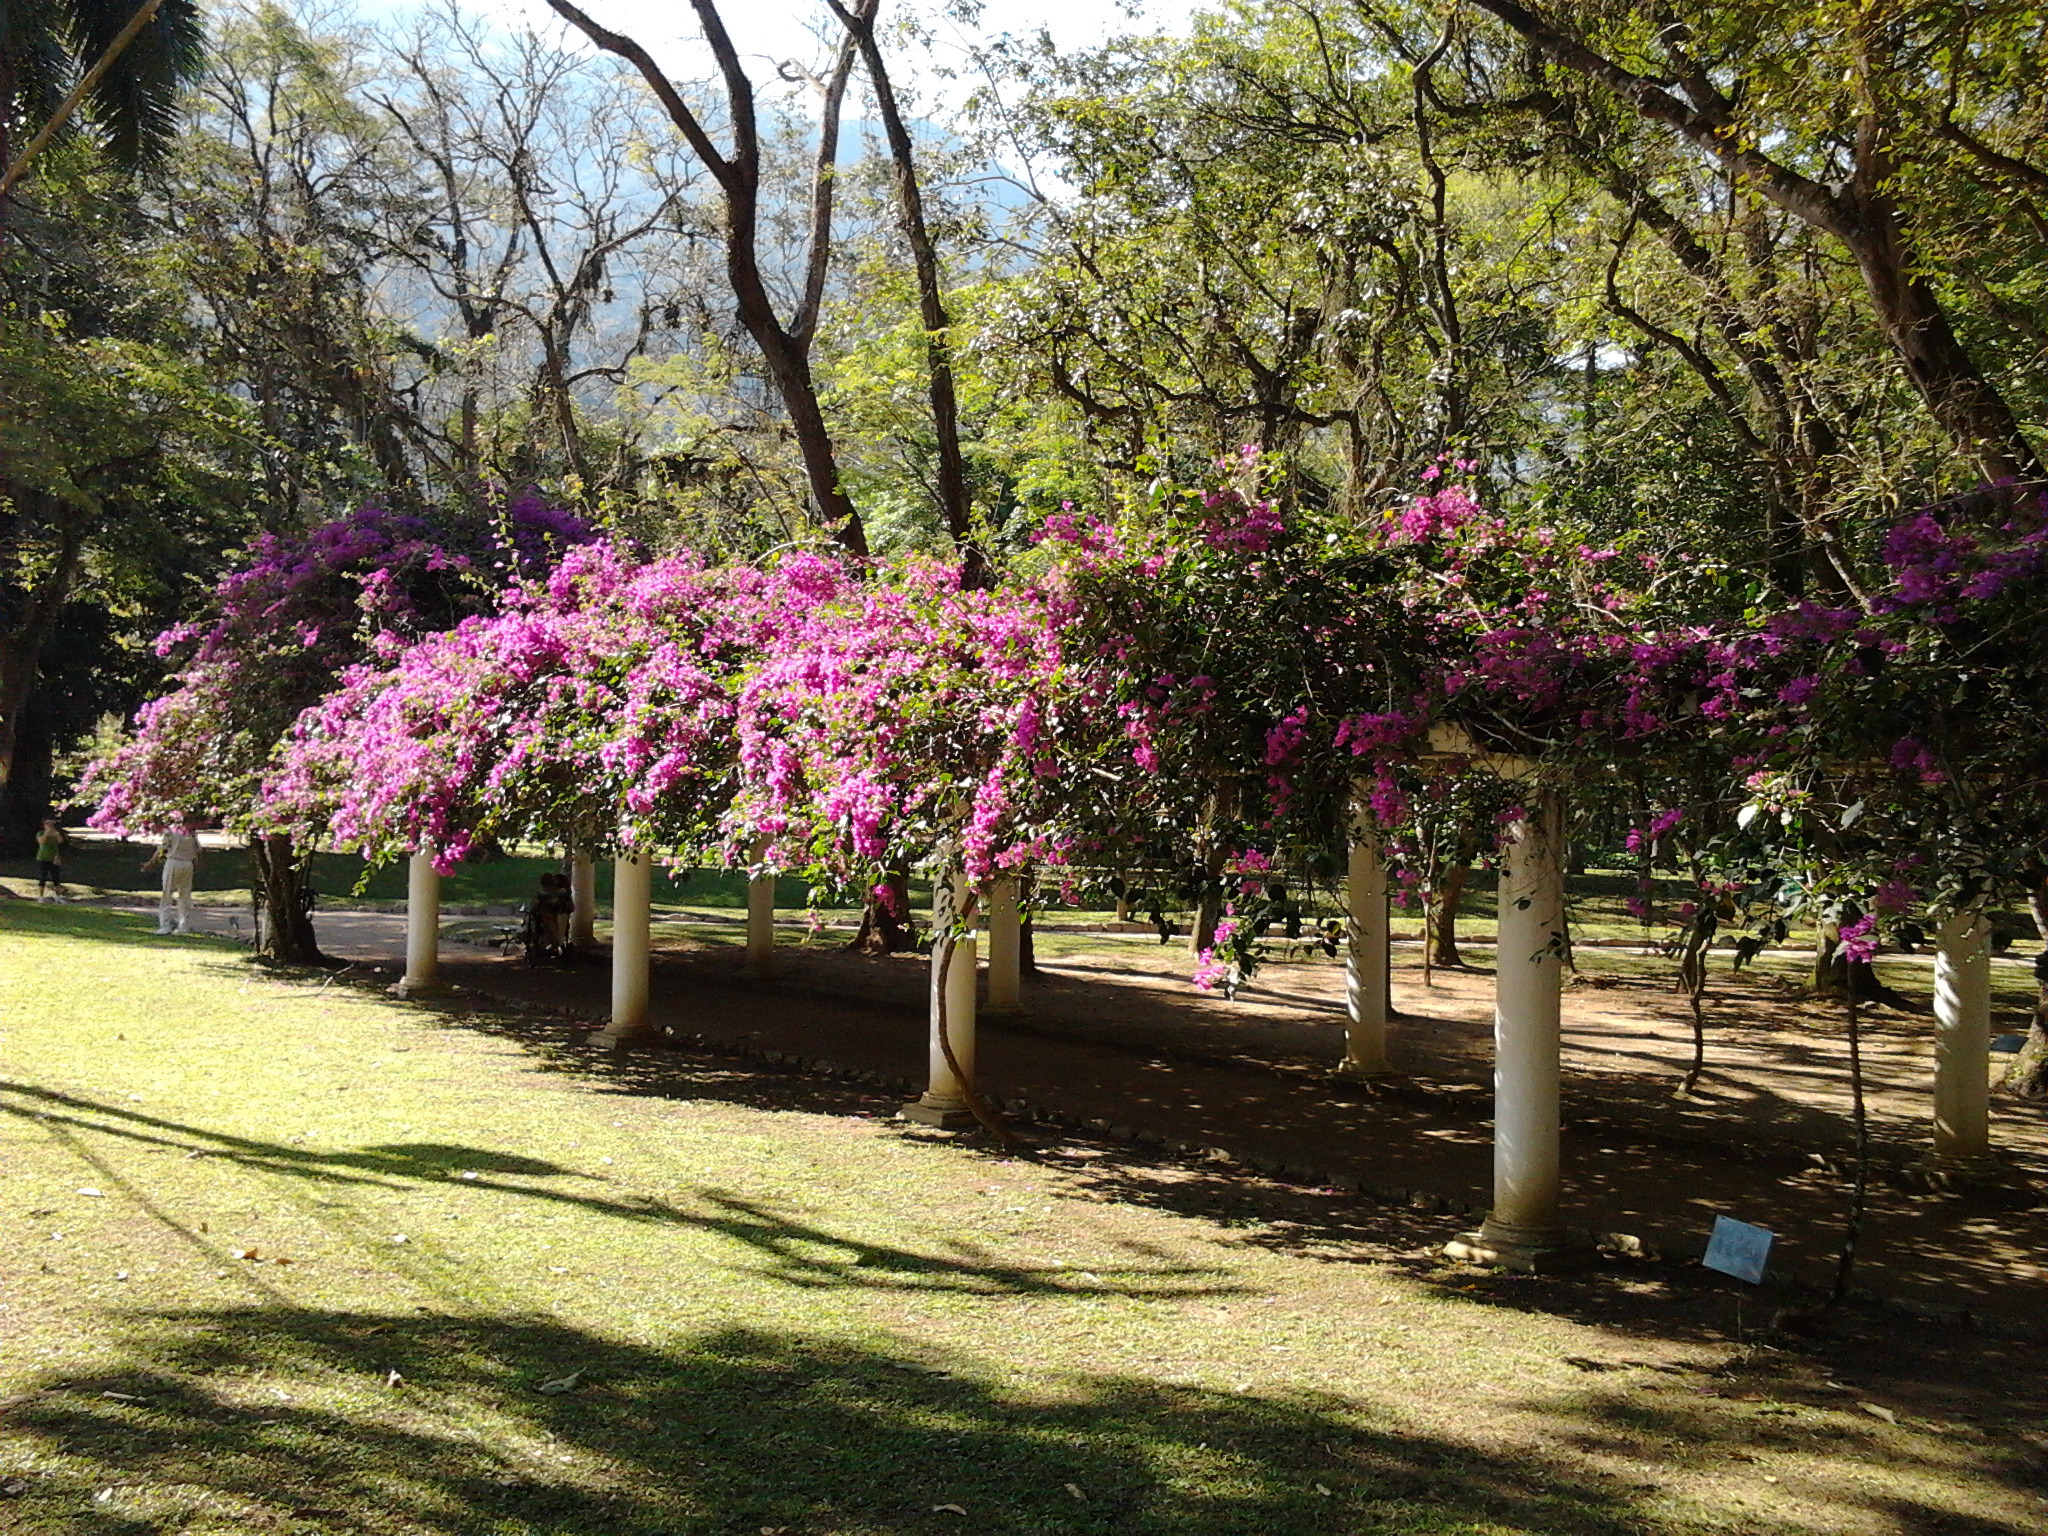 several flowers on trees in a park